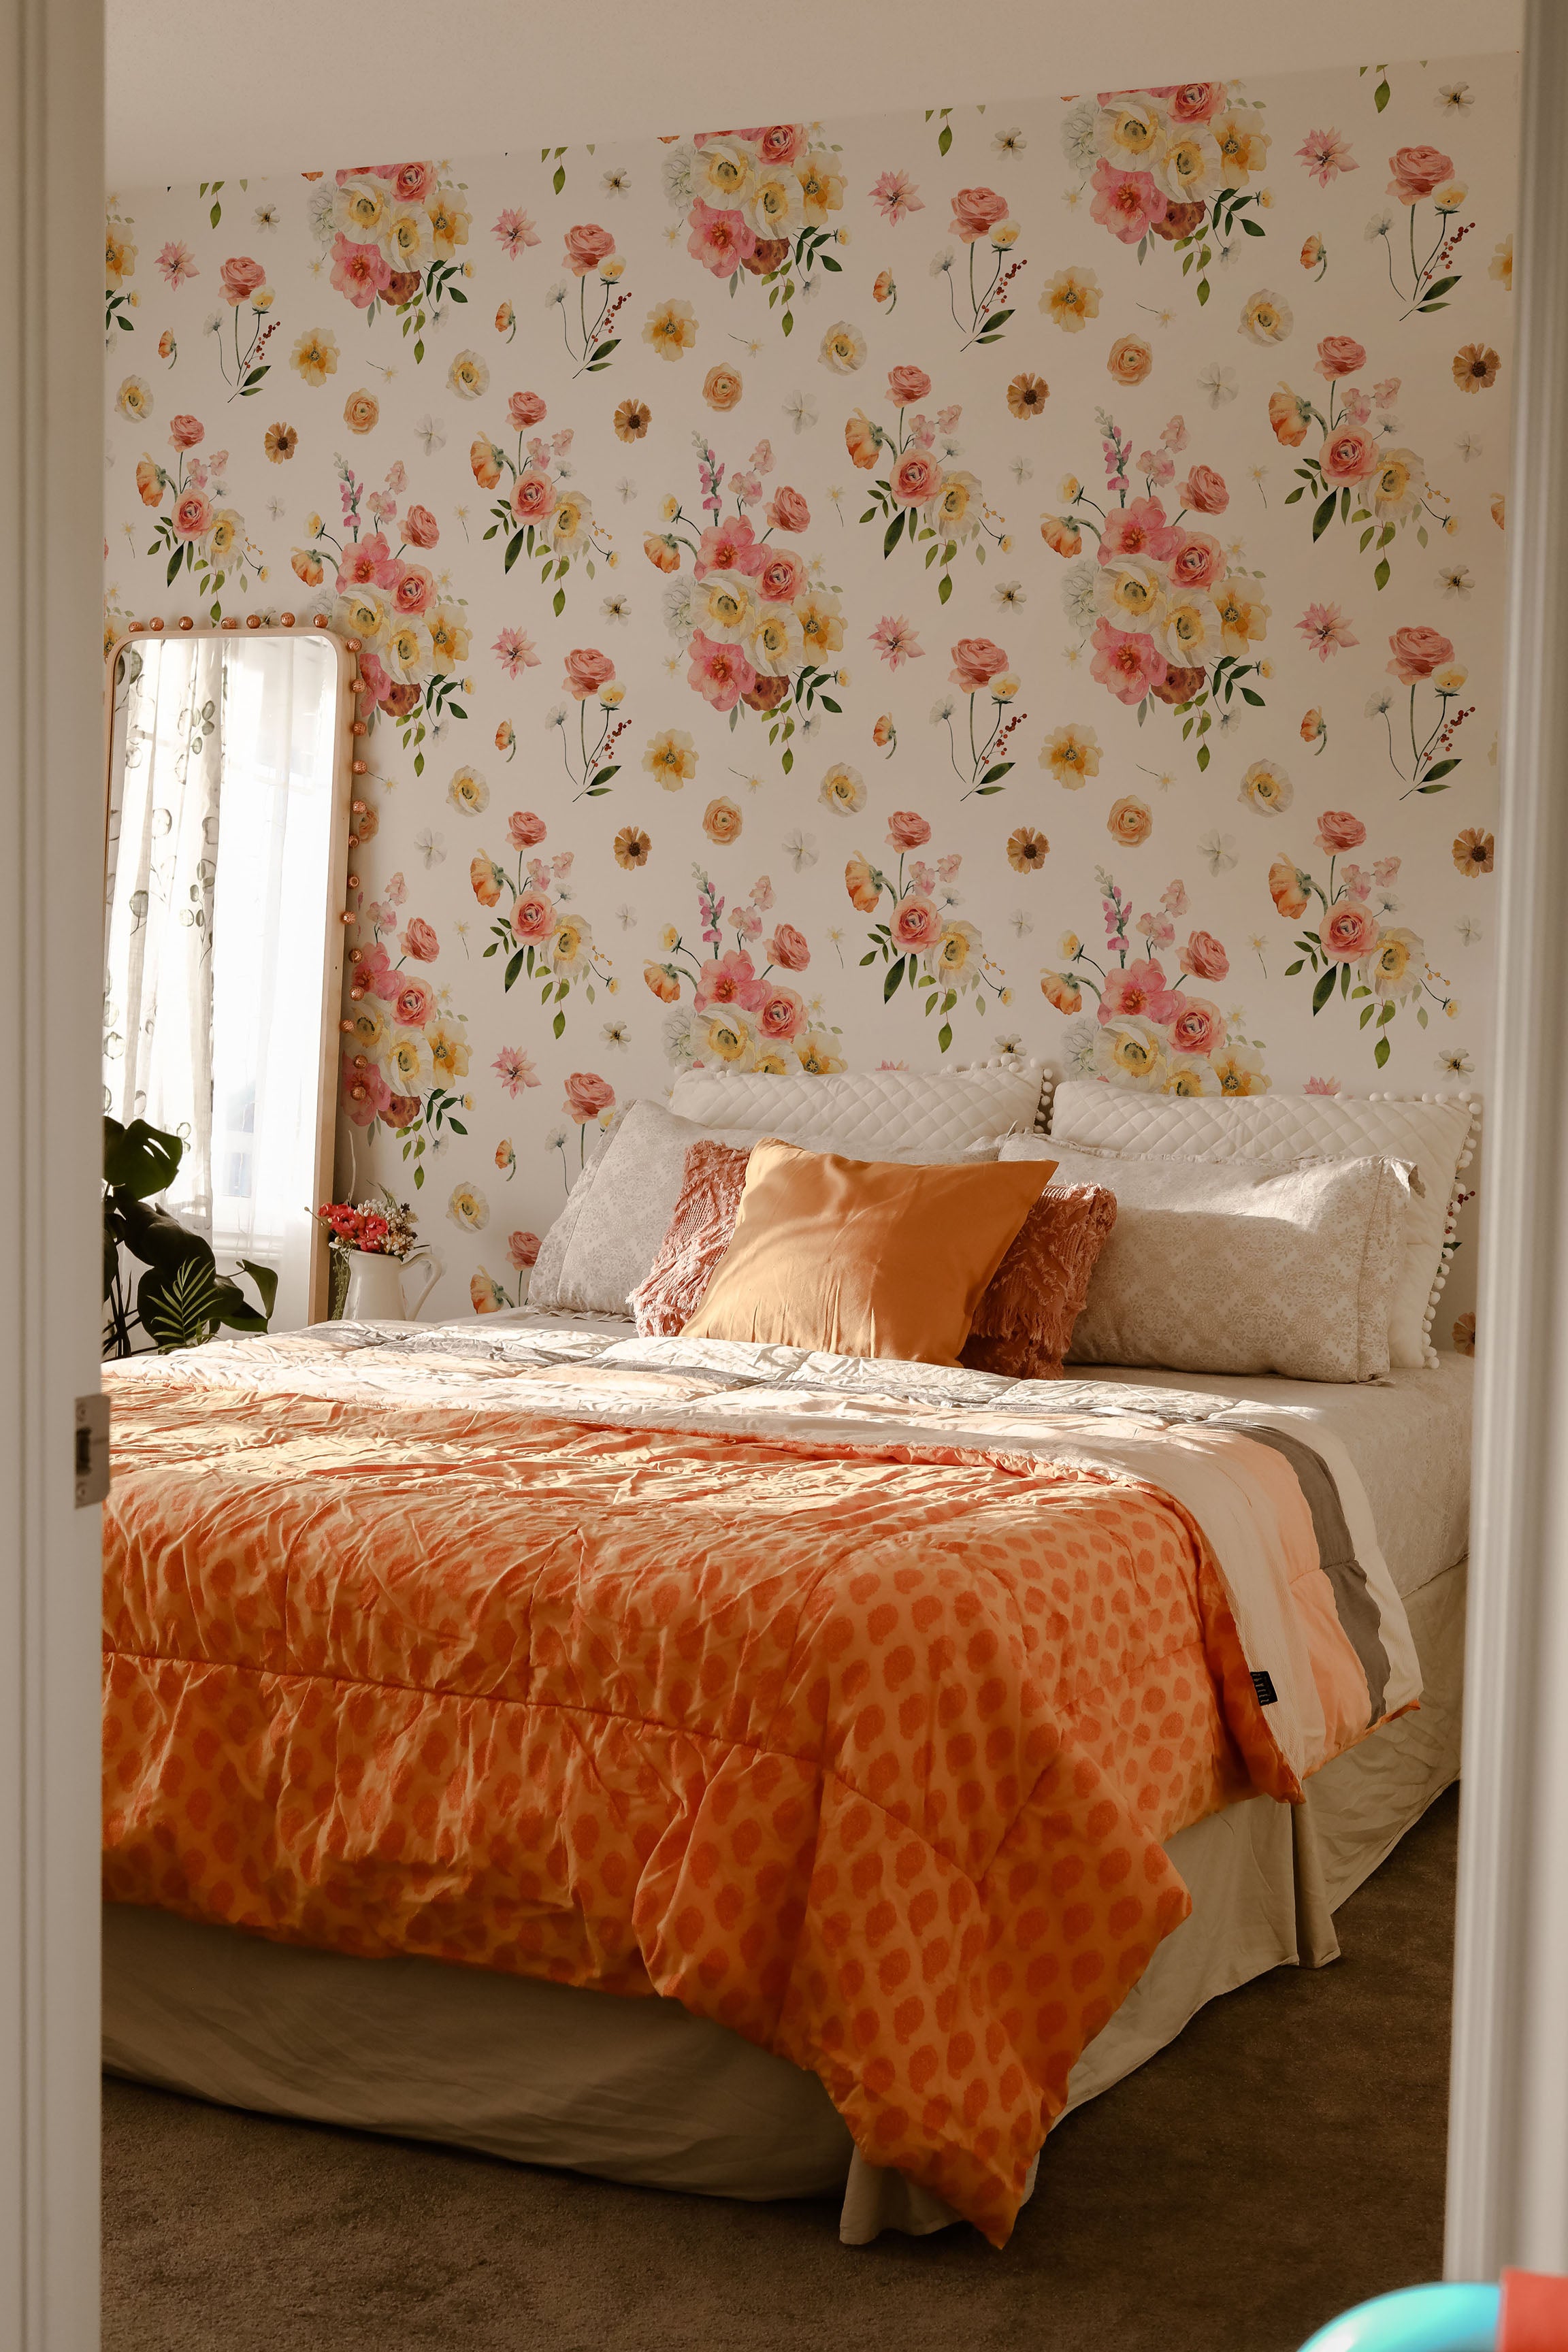 Golden Garden Wallpaper showcasing a lively floral design in a bedroom, with a neatly made bed adorned with orange bedding and pillows, and sunlight streaming through the window